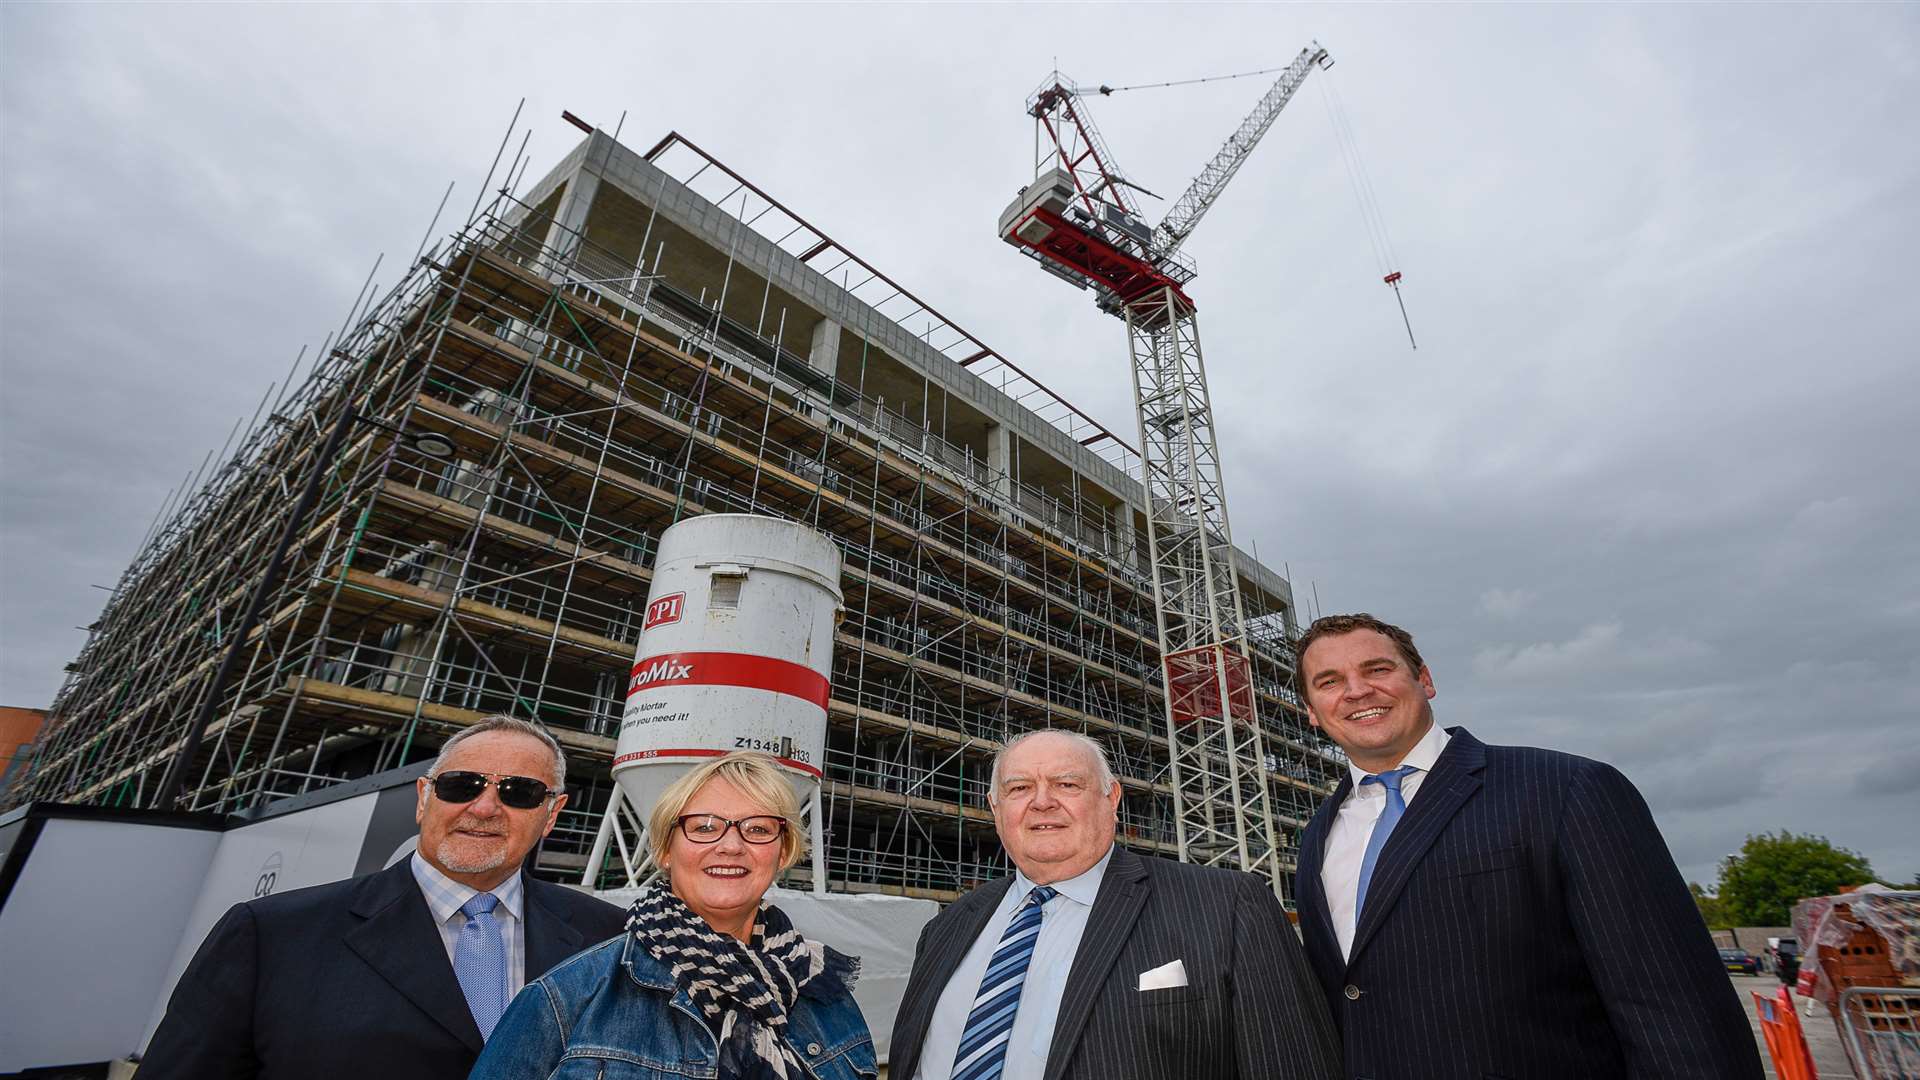 Developer George Wilson, ABC's Tracey Kerly, council leader Gerry Clarkson and developer Mark Quinn